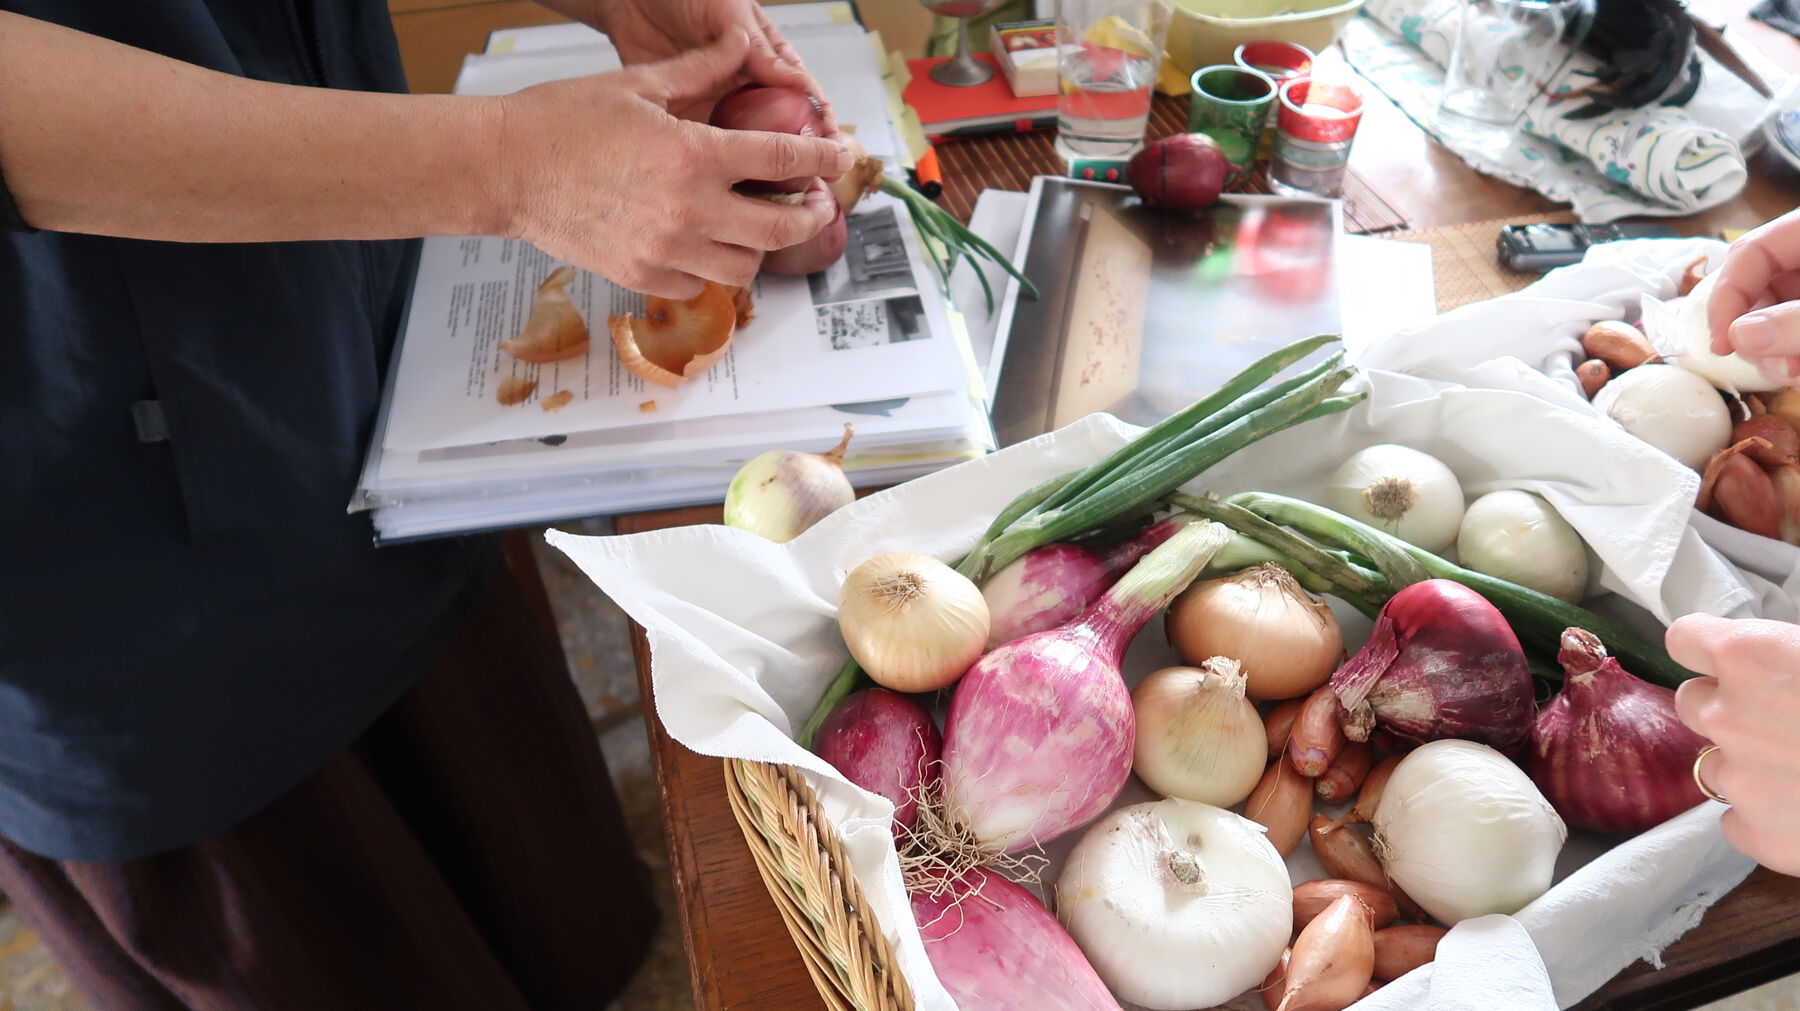 Assorted onions (white, purple, pink, reddish-orange) in basket with figure holding one above reference book